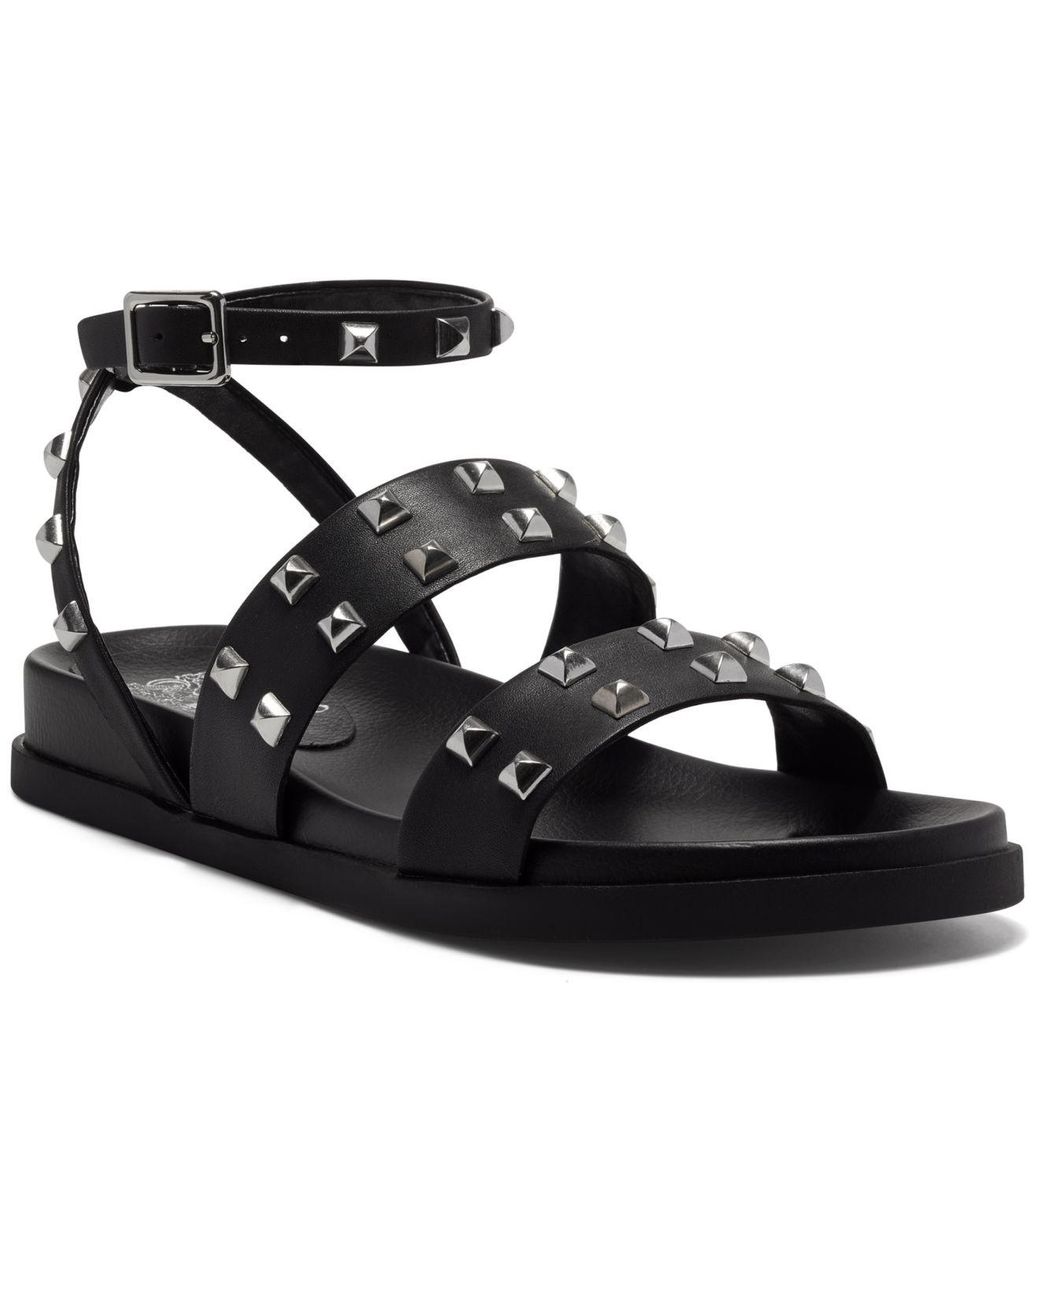 Vince Camuto Pealan Studded Sandals in Black | Lyst